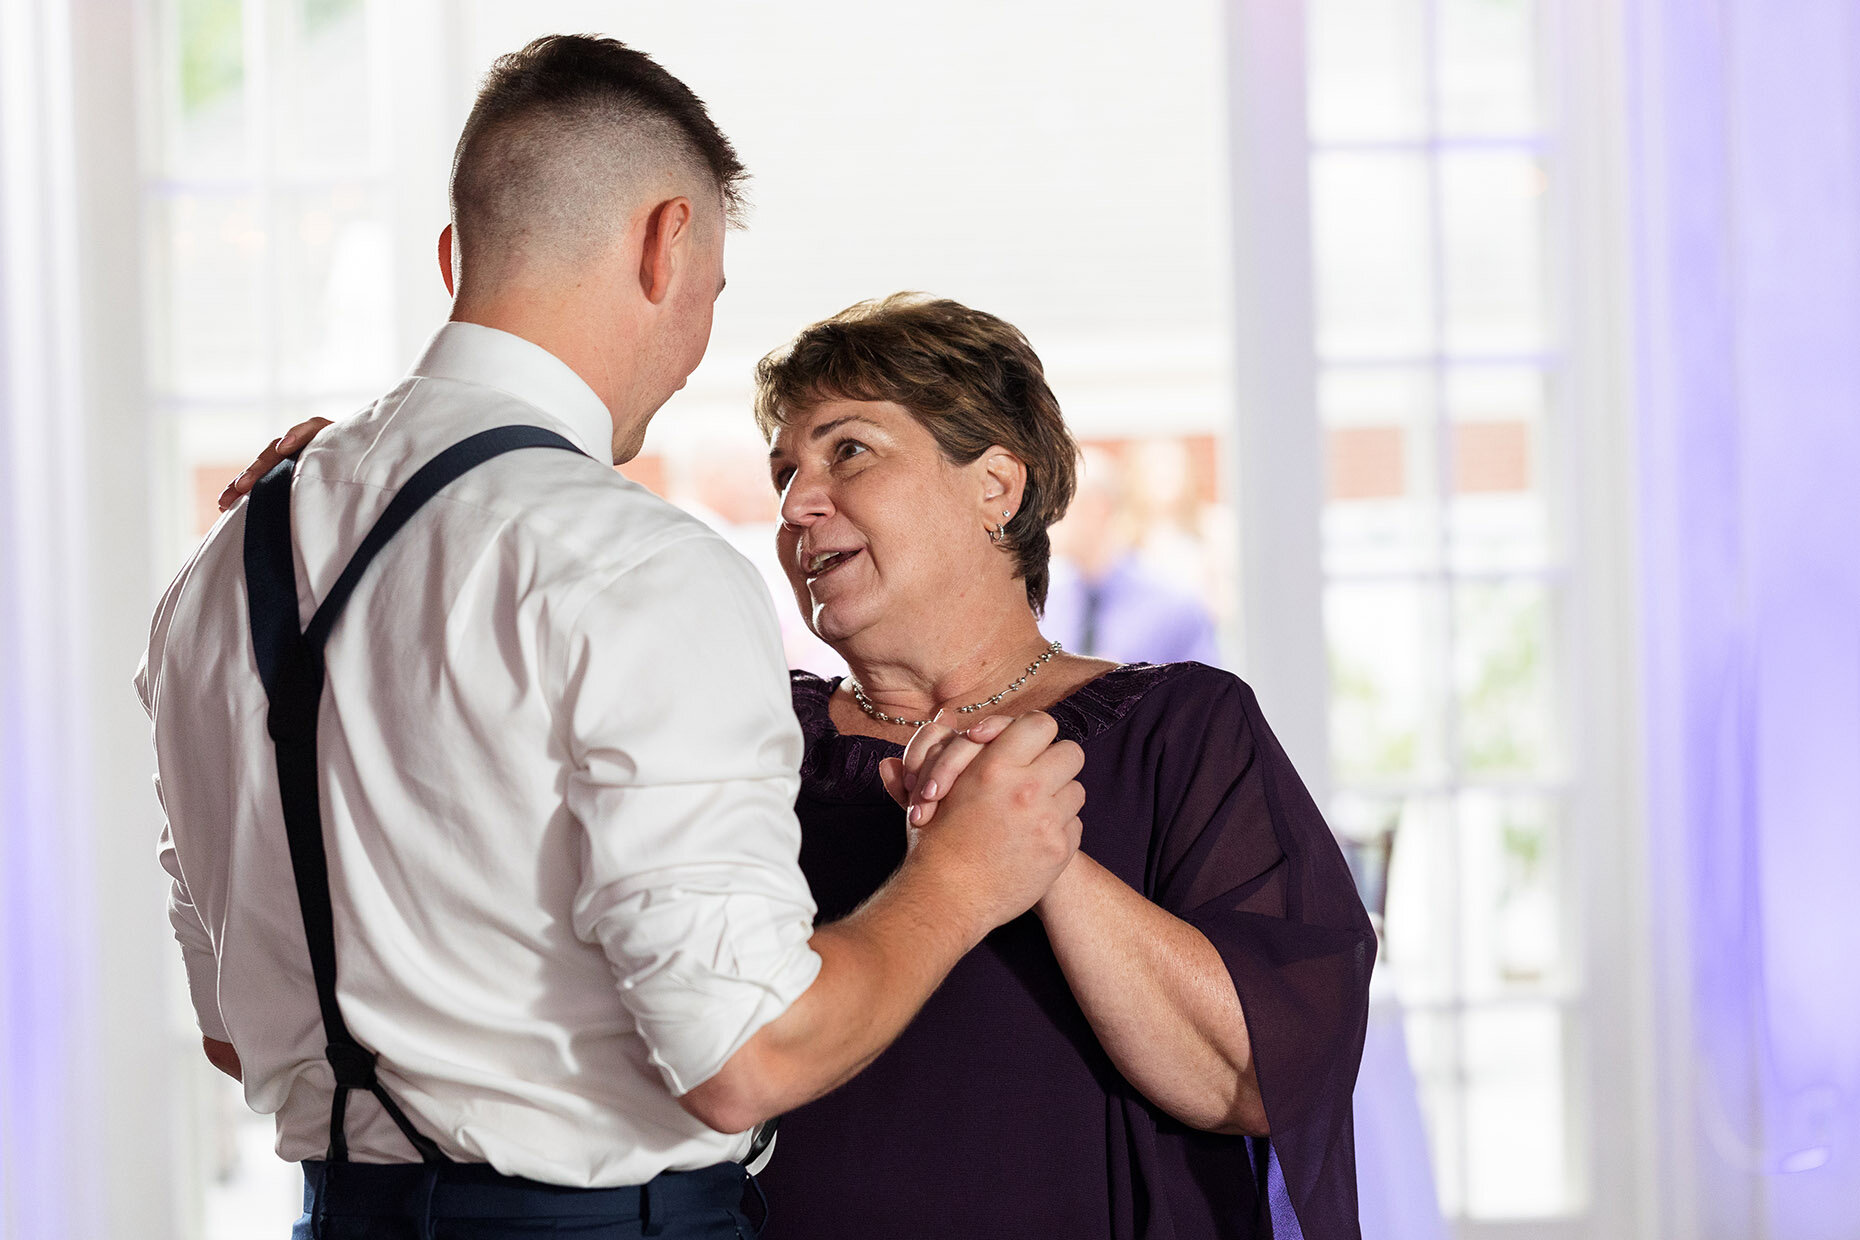 Mother Son Dance at Lily Manor Wedding Central Mifflin, PA 